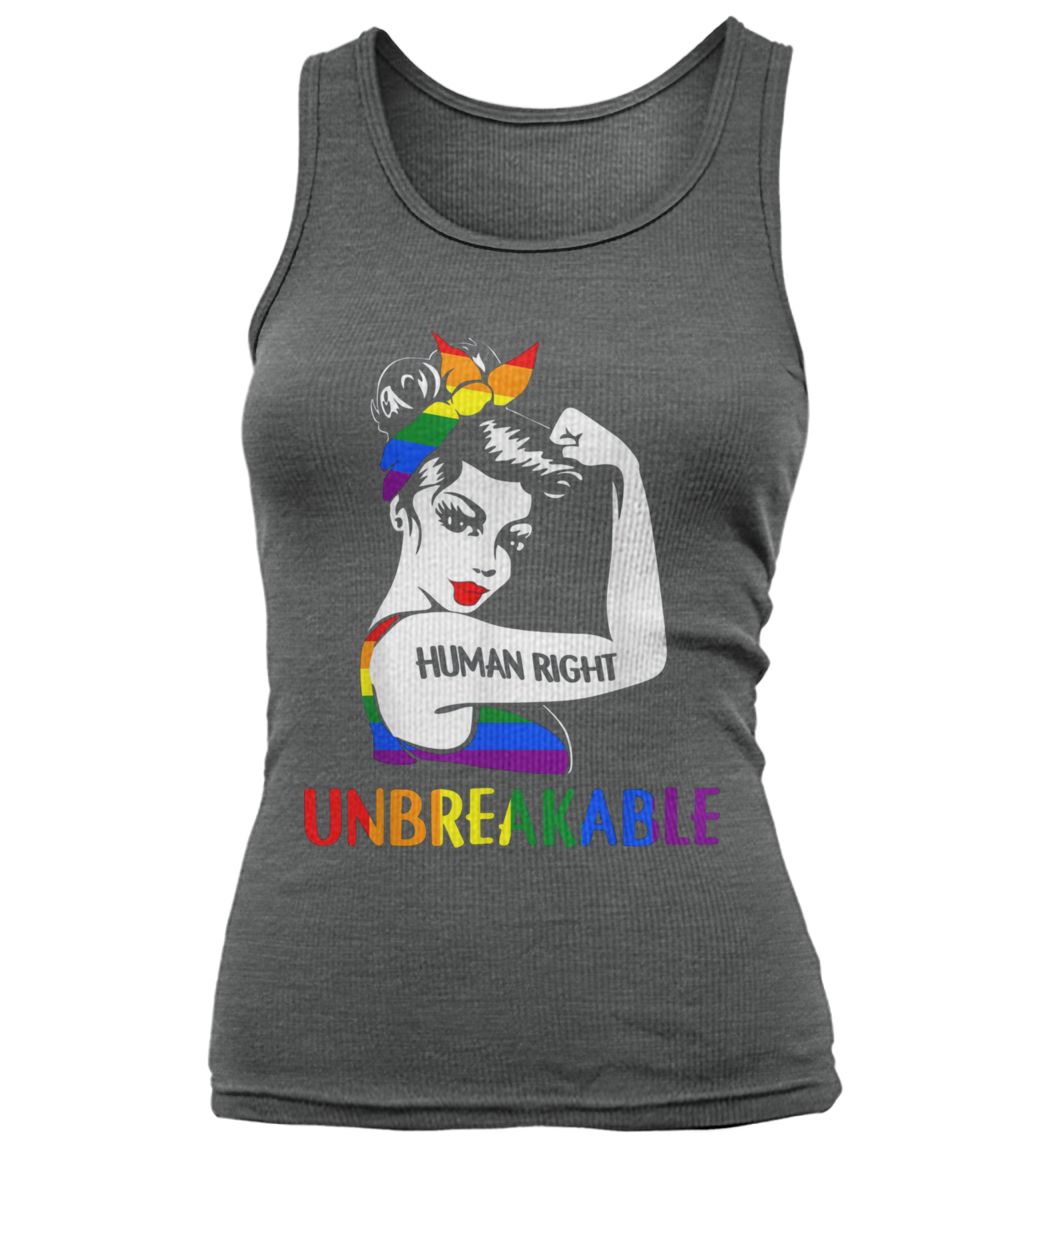 Unbreakable human right gay les pride rainbow women's tank top